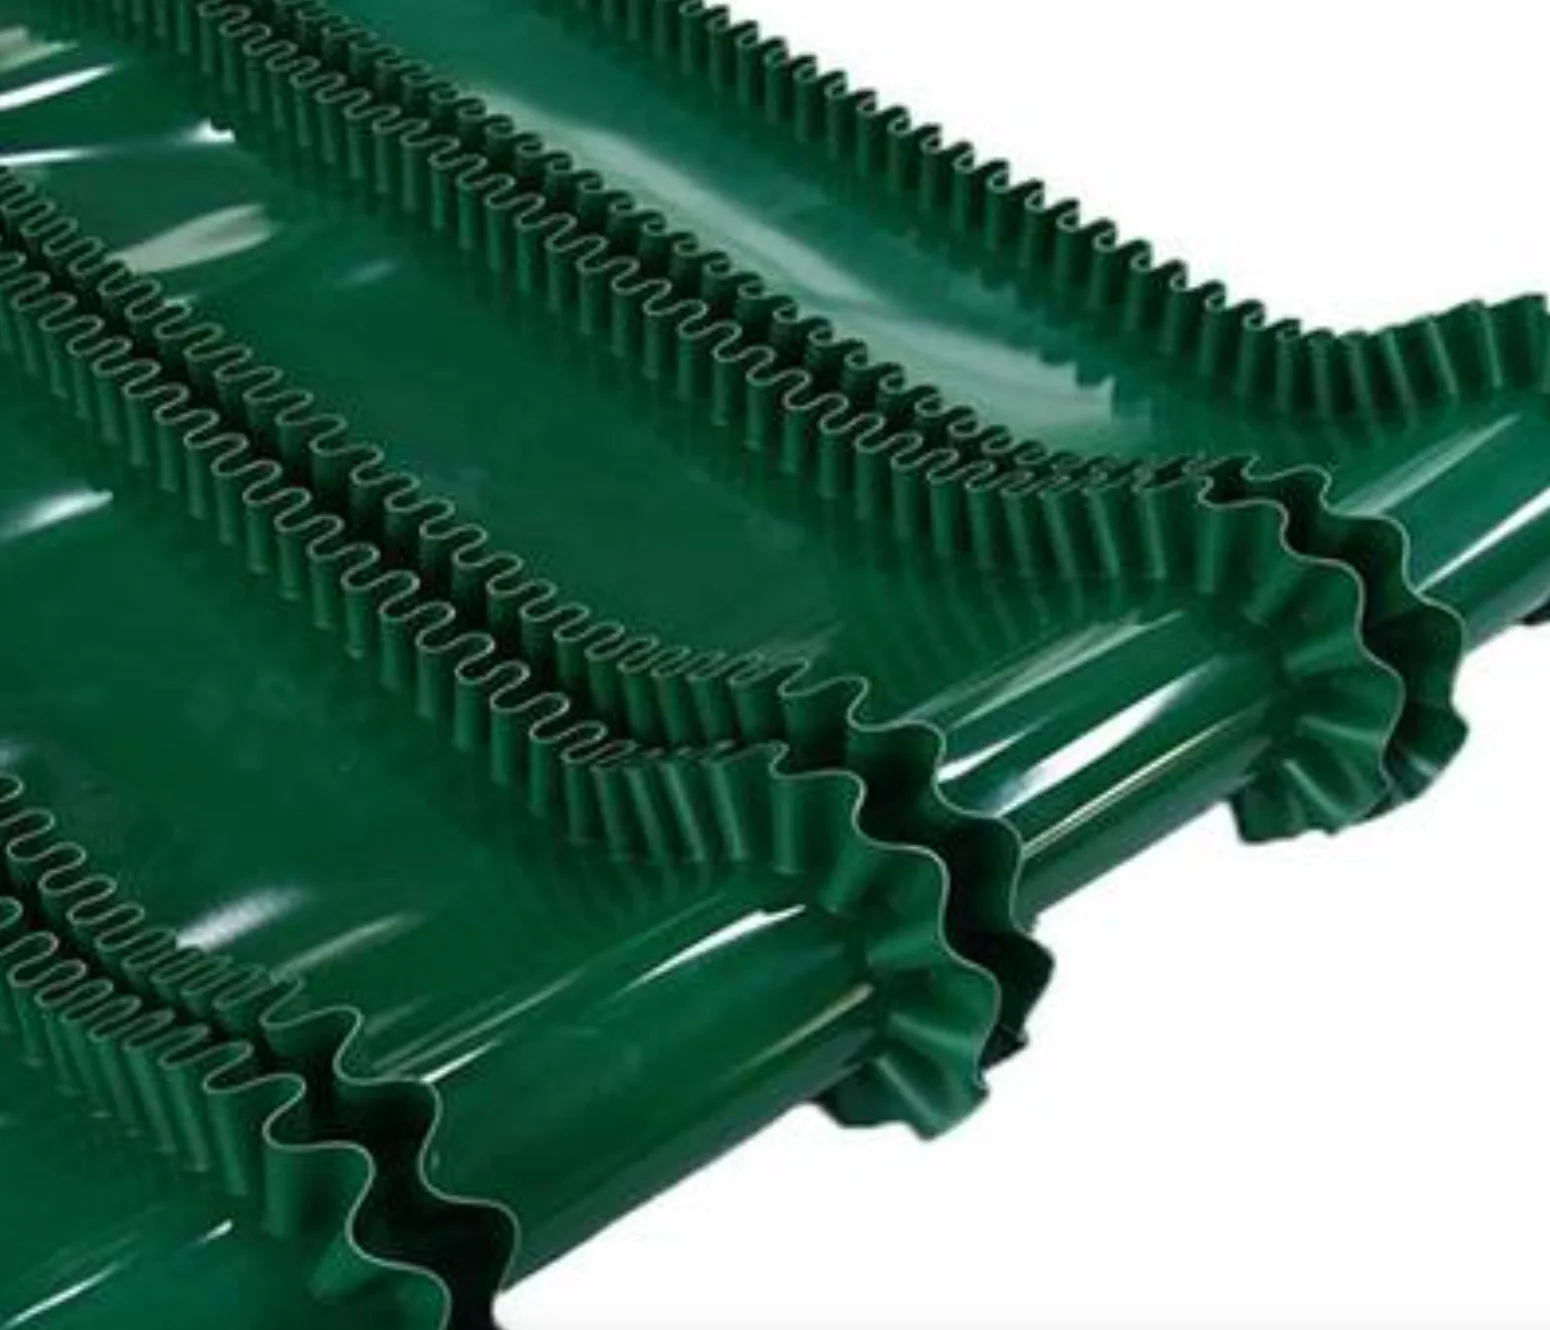 

Perimeter:6050x330x3mm with 30mm height cleats green pvc conveyor belt